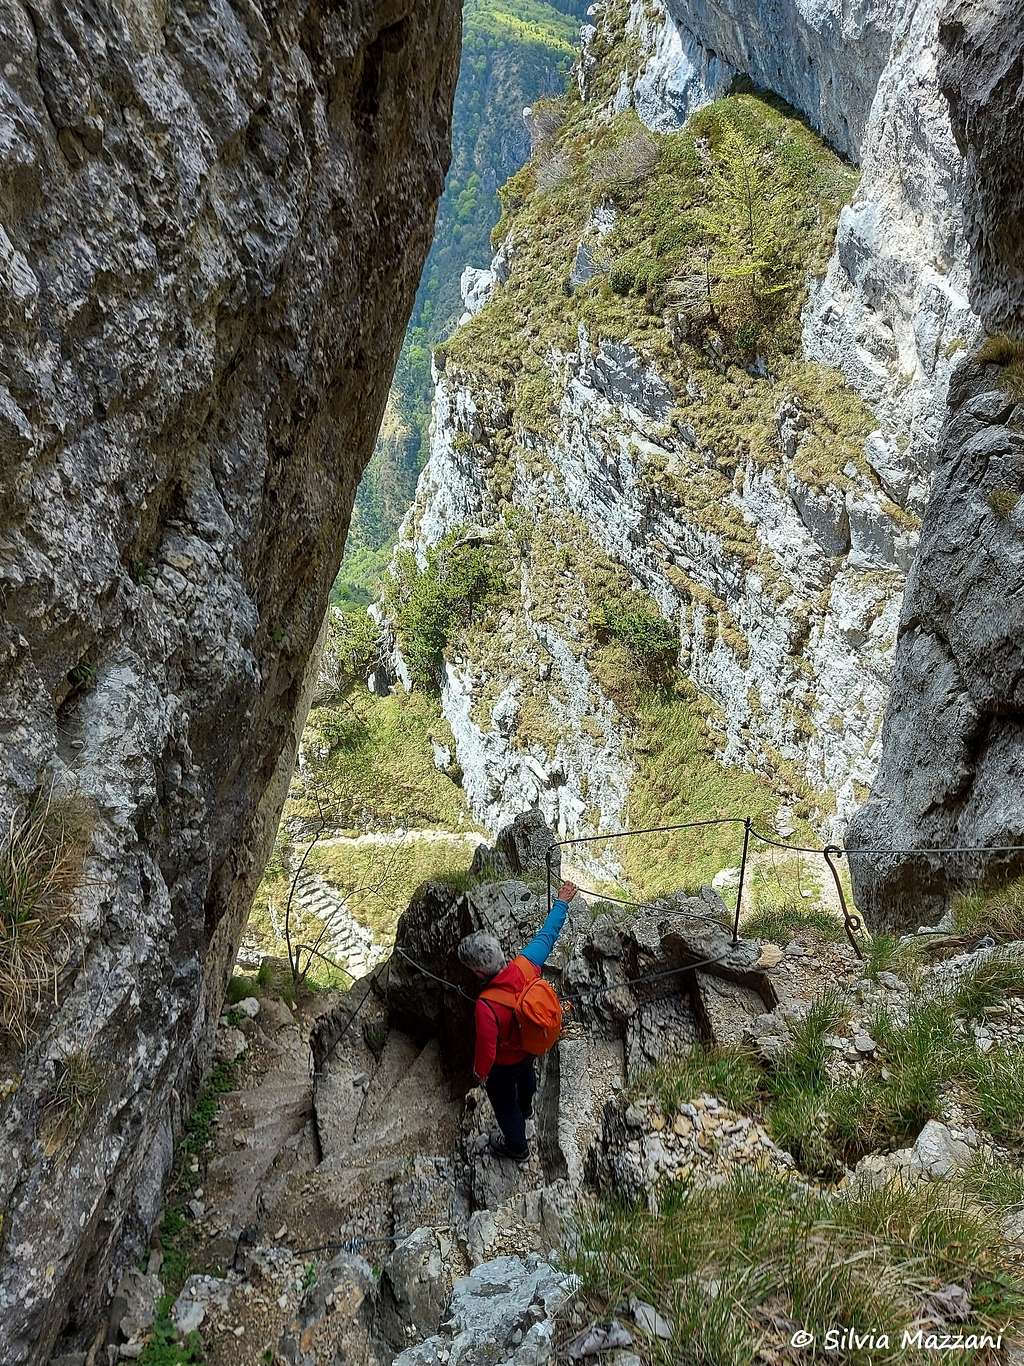 The Agostino Tosi Path, carved in the rock Monte Carone